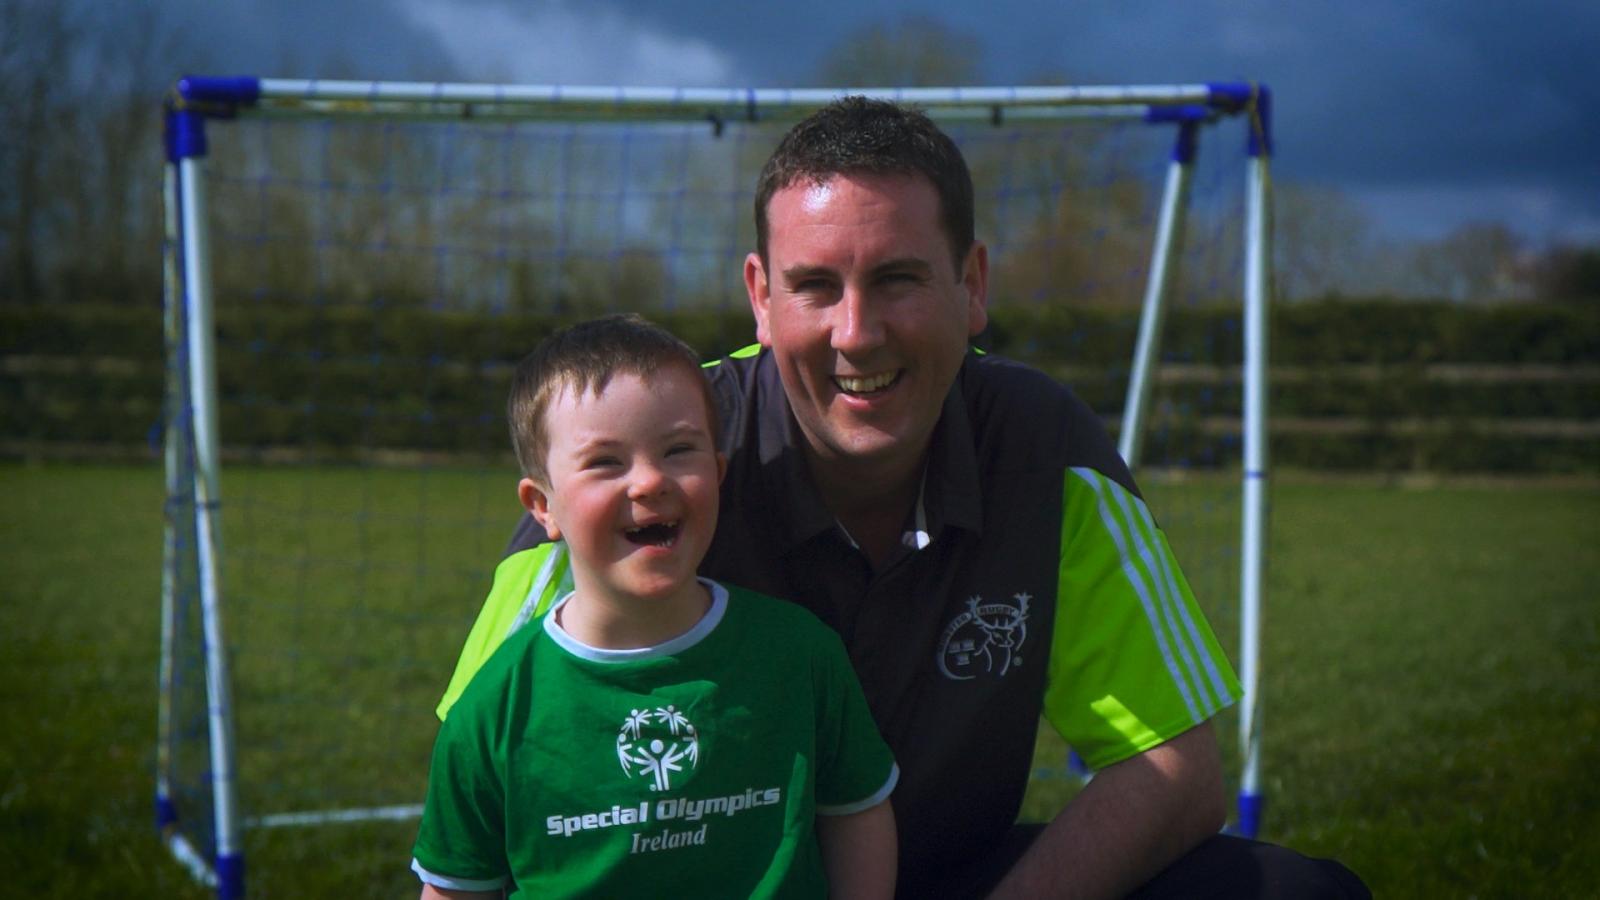 Find out ways you can support future champions of Special Olympics Ireland